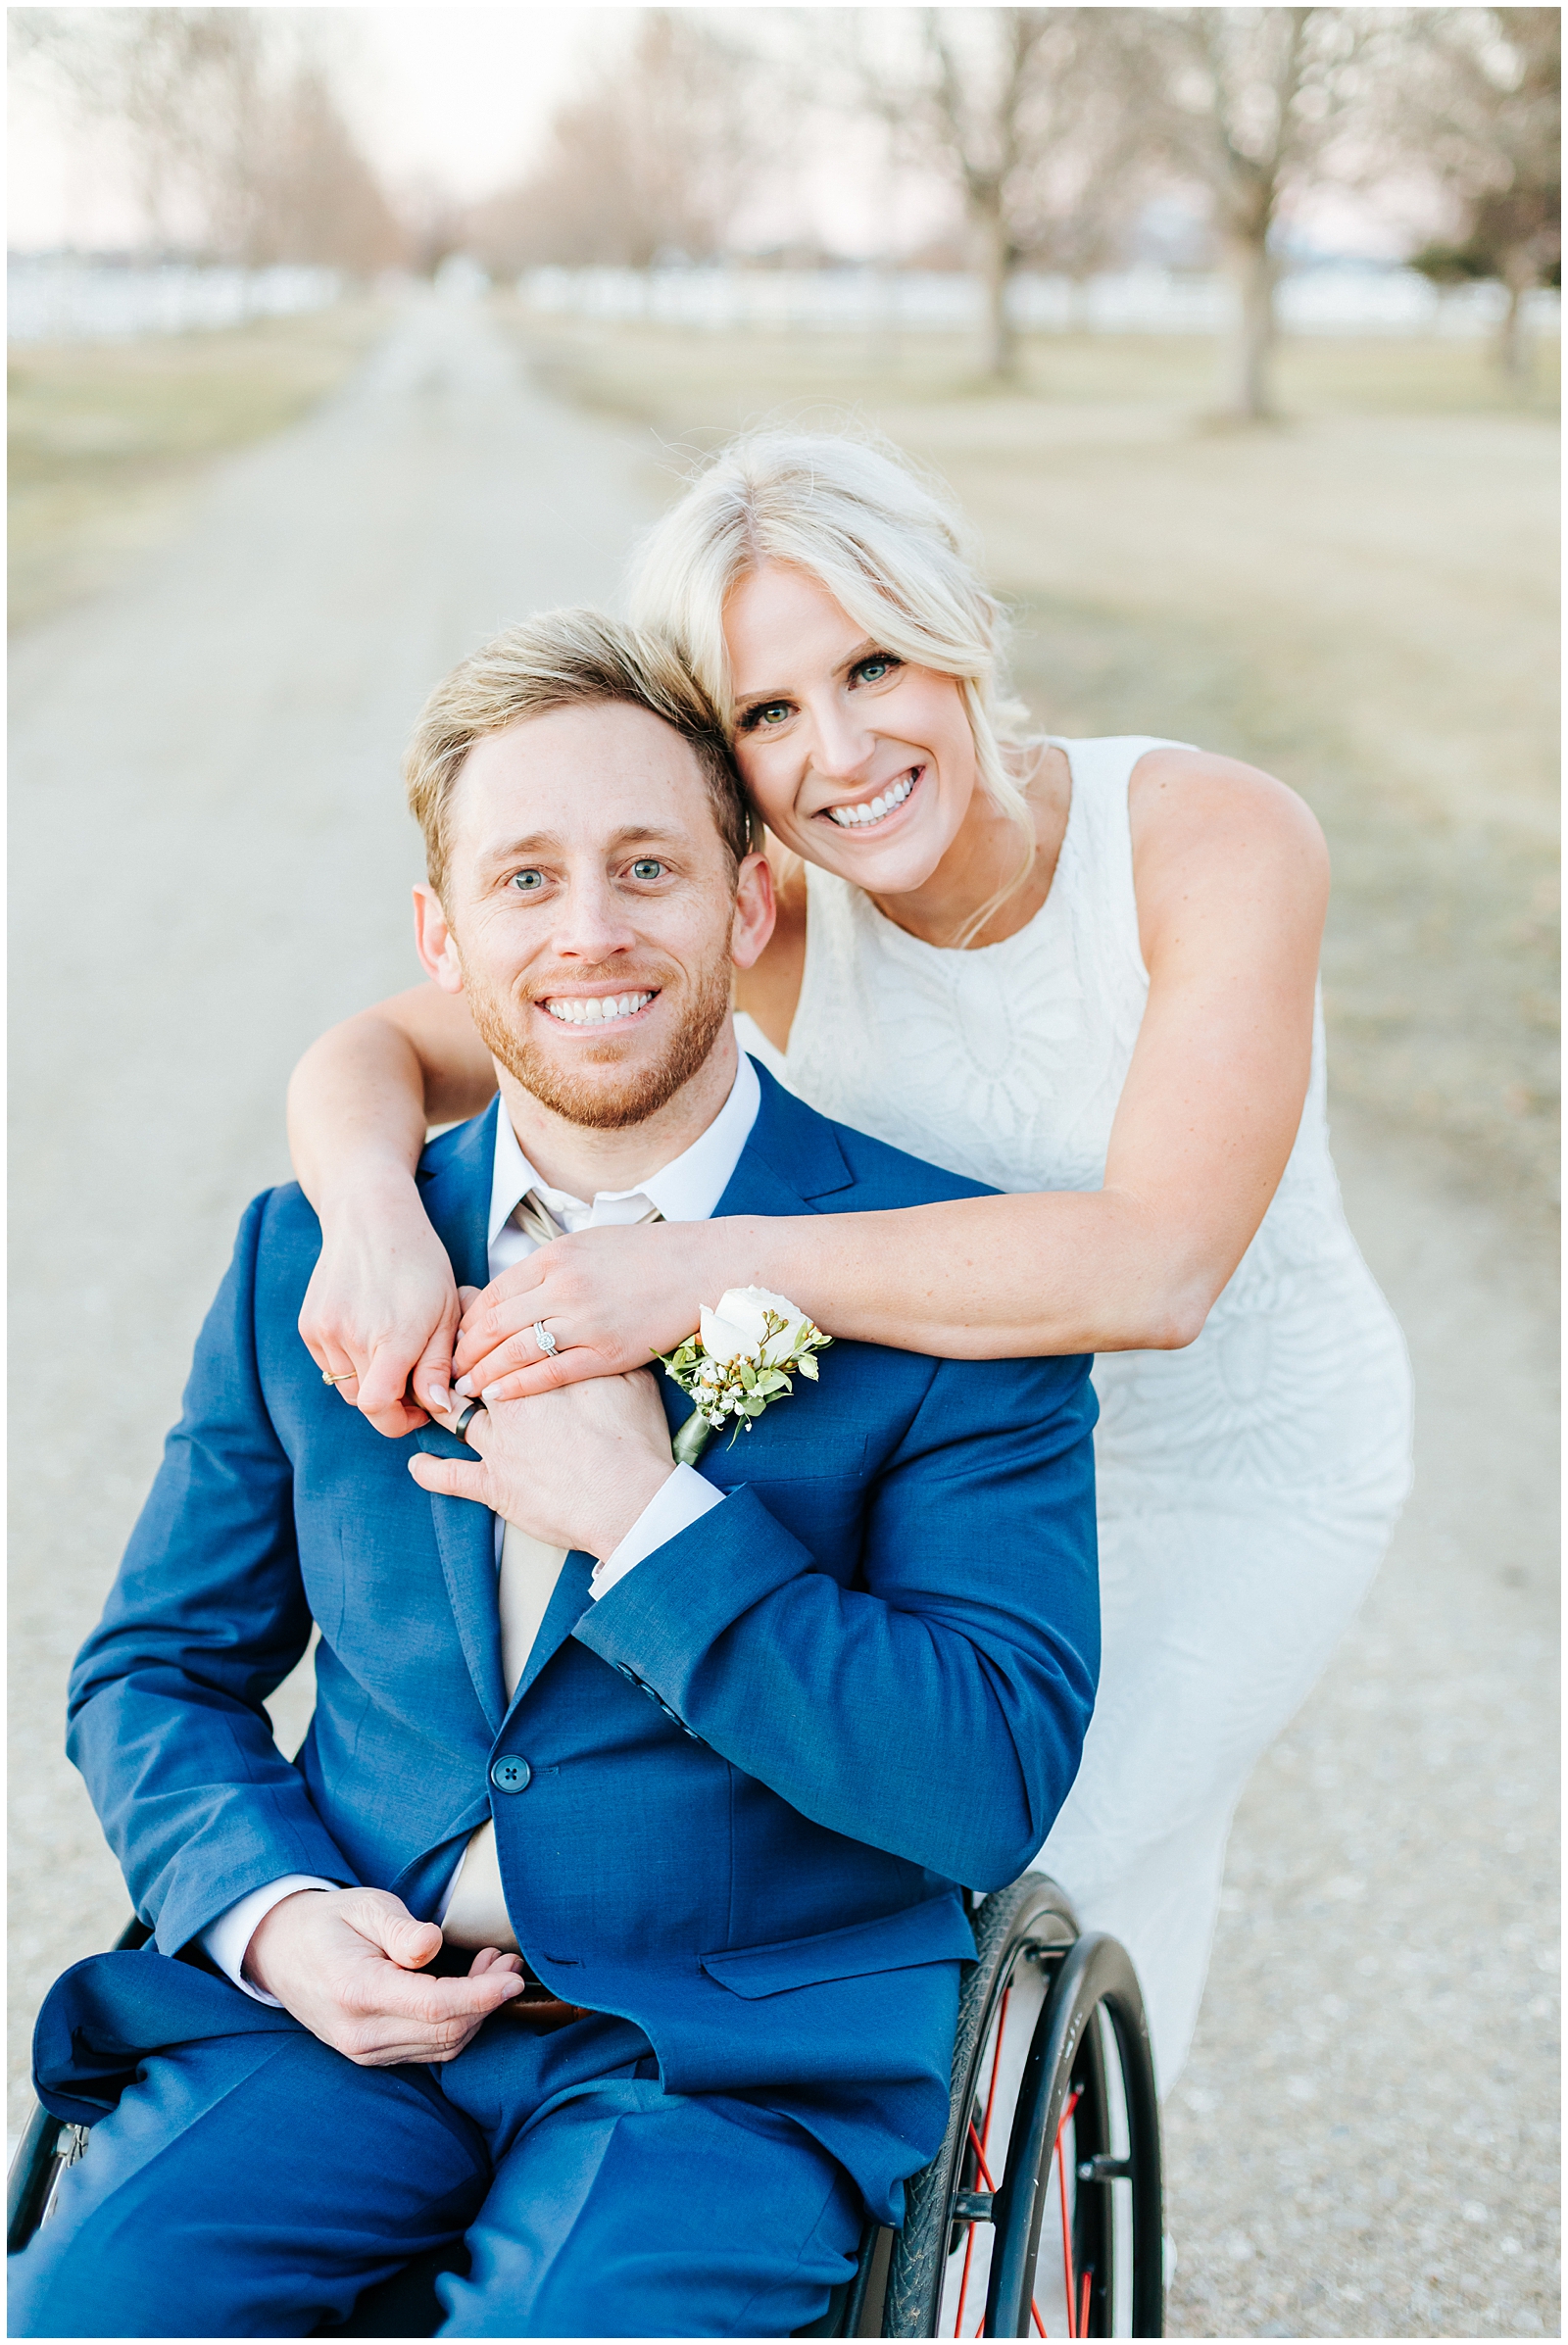 Husband and Wife Golden Hour Portraits at Heartfelt Idaho Spring Elopement